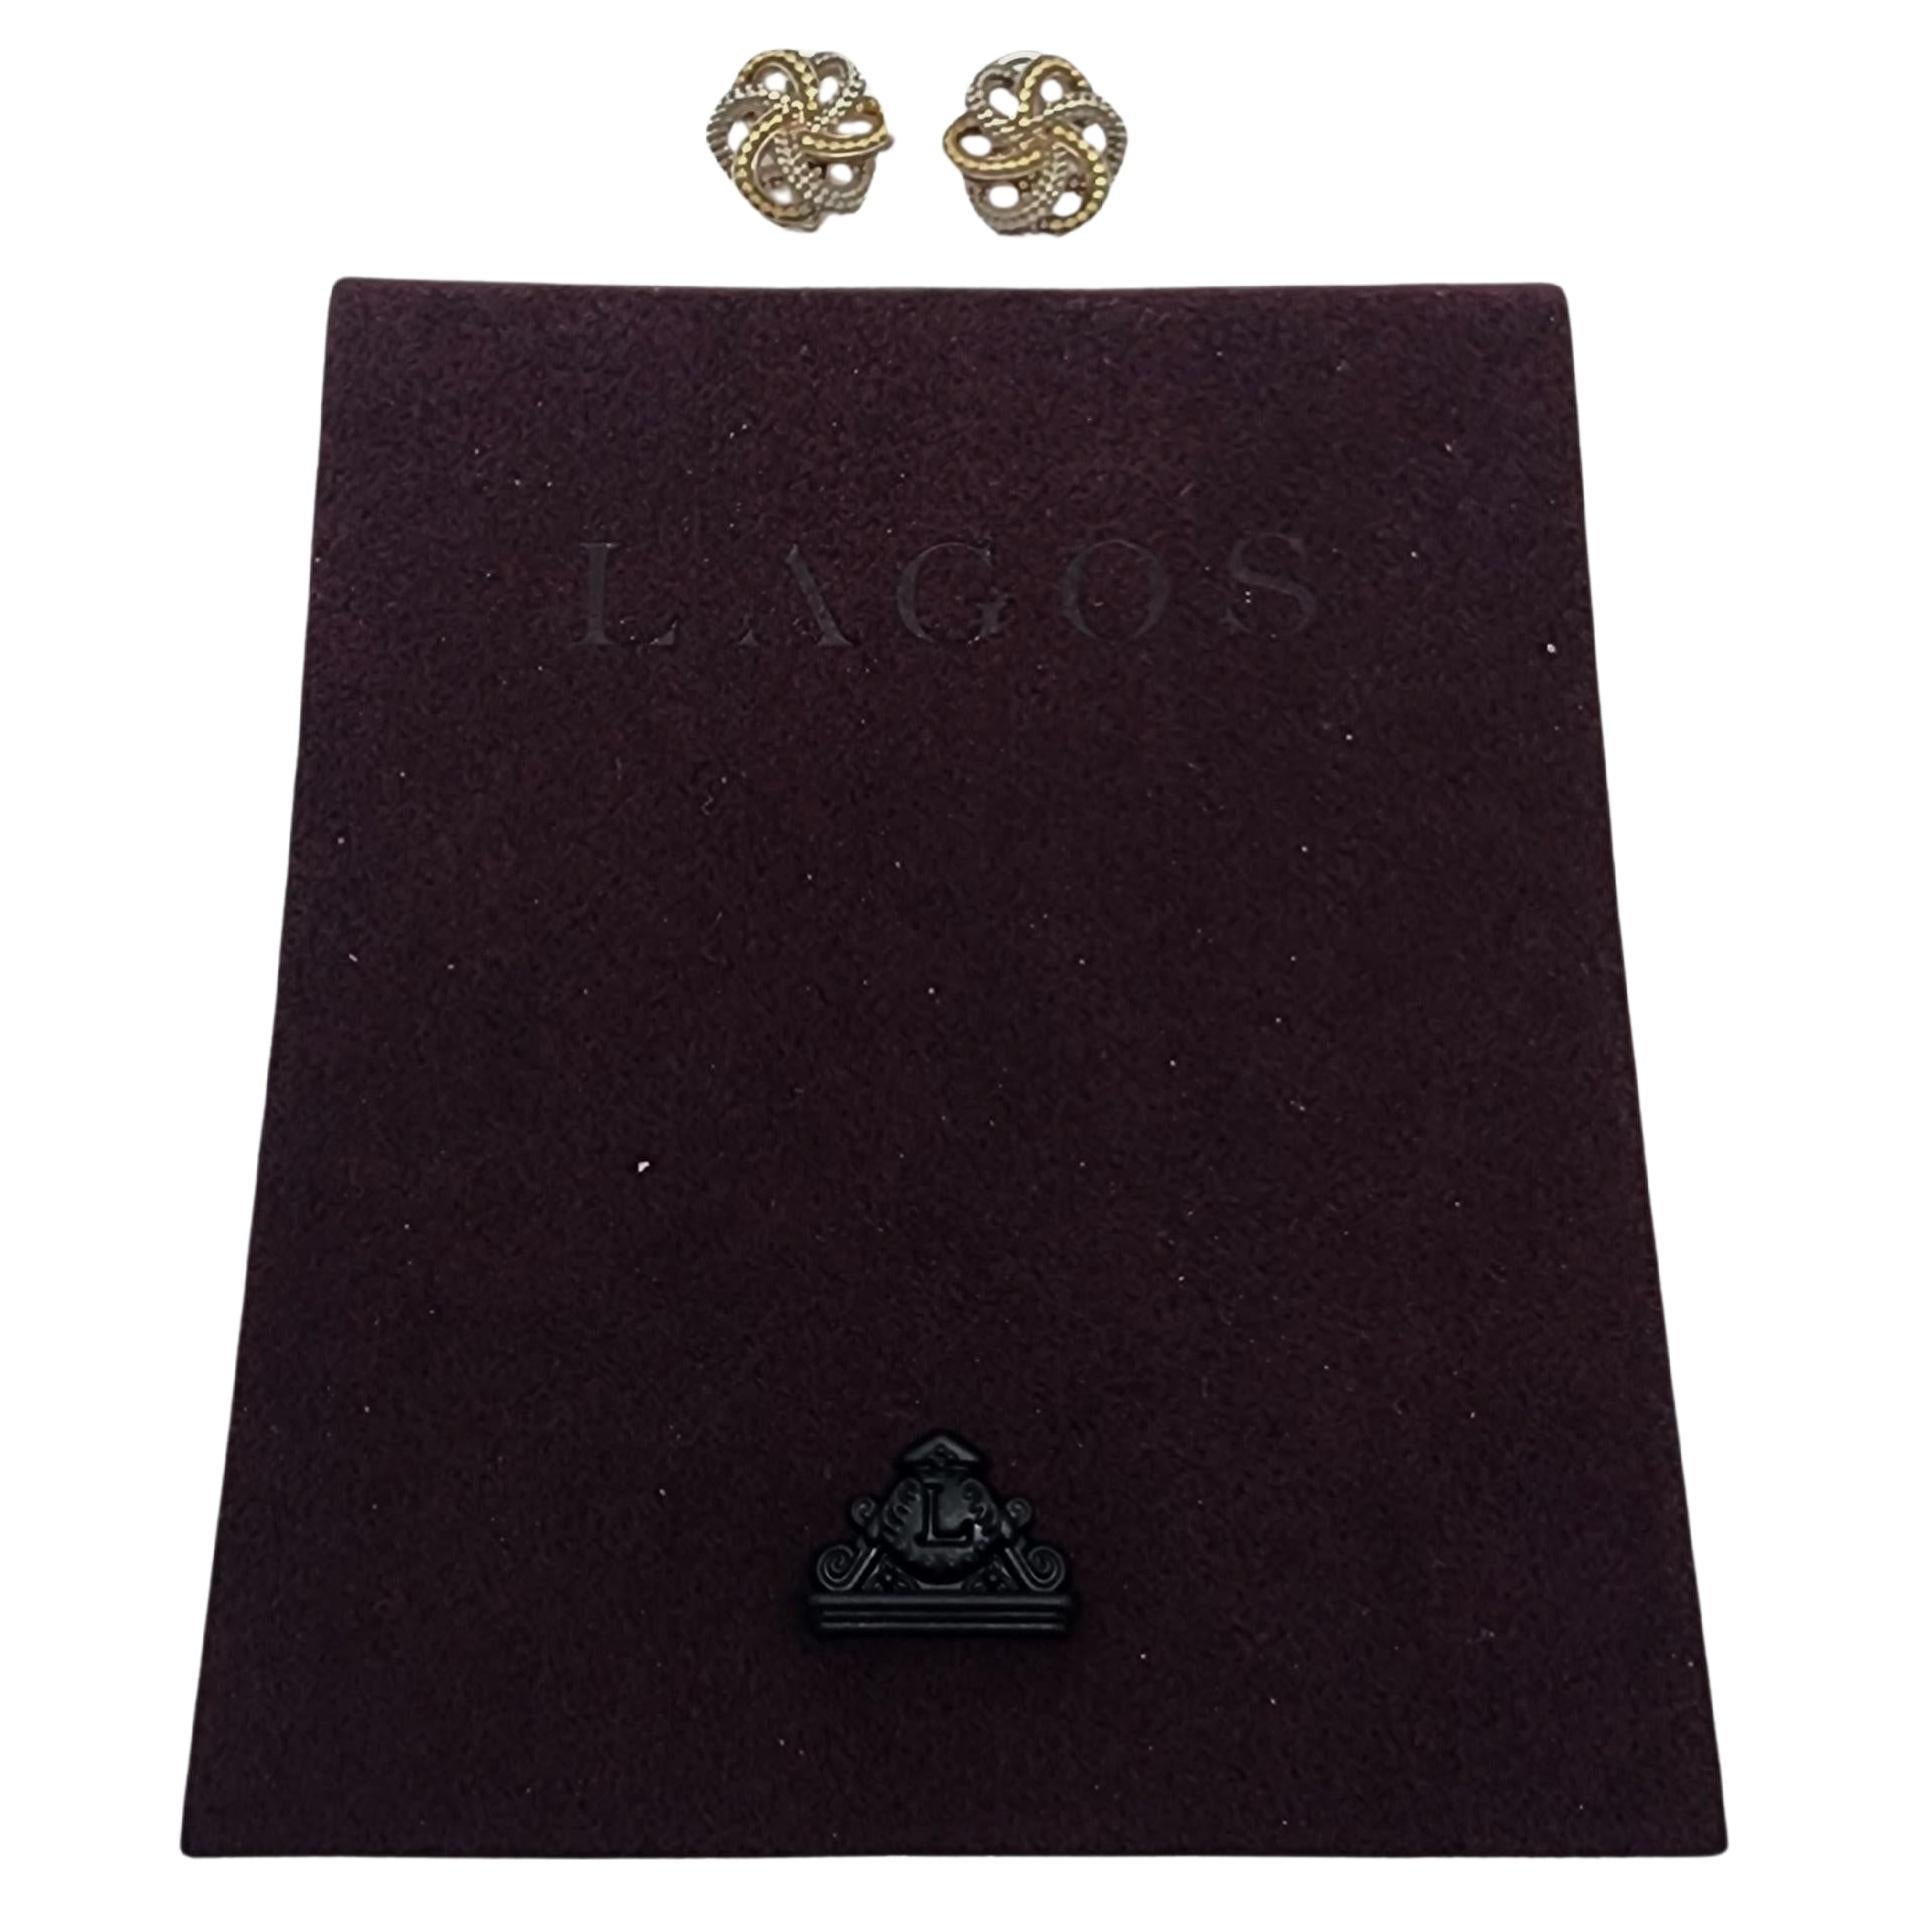 Lagos Caviar Sterling Silver 18K Plated 2 Tone Love Knot Earrings w/Pouch #16275